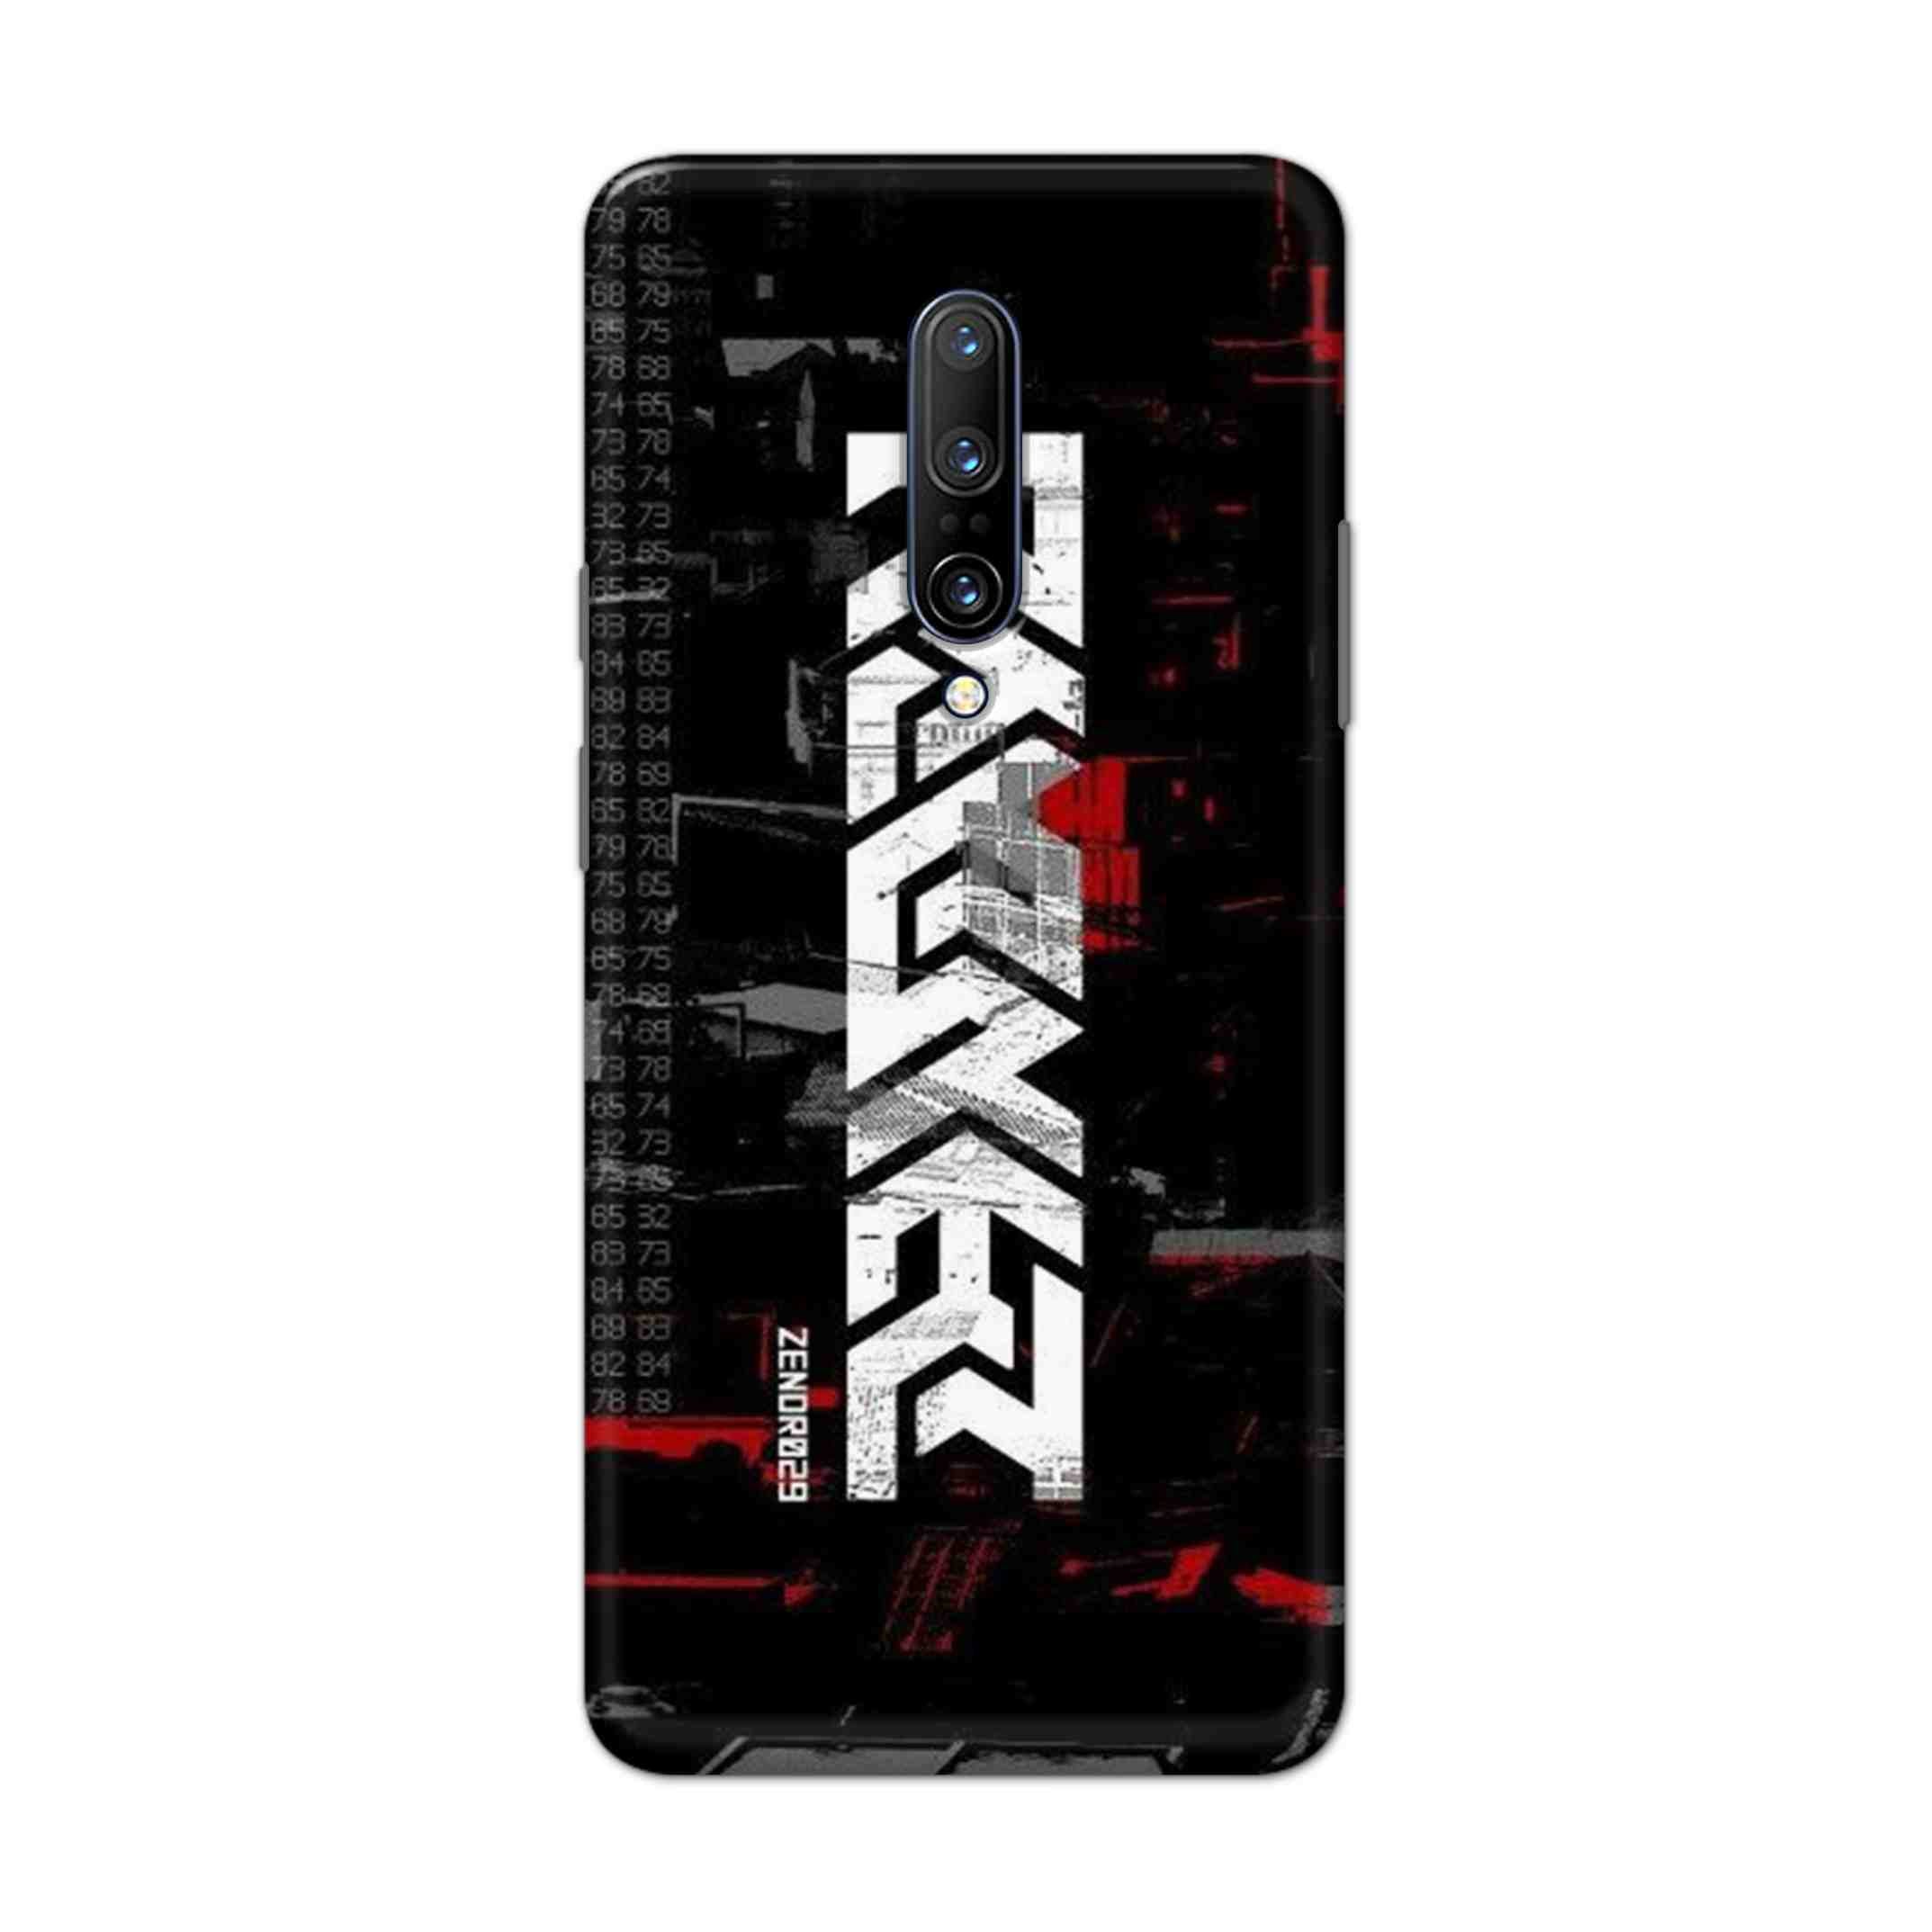 Buy Raxer Hard Back Mobile Phone Case Cover For OnePlus 7 Pro Online